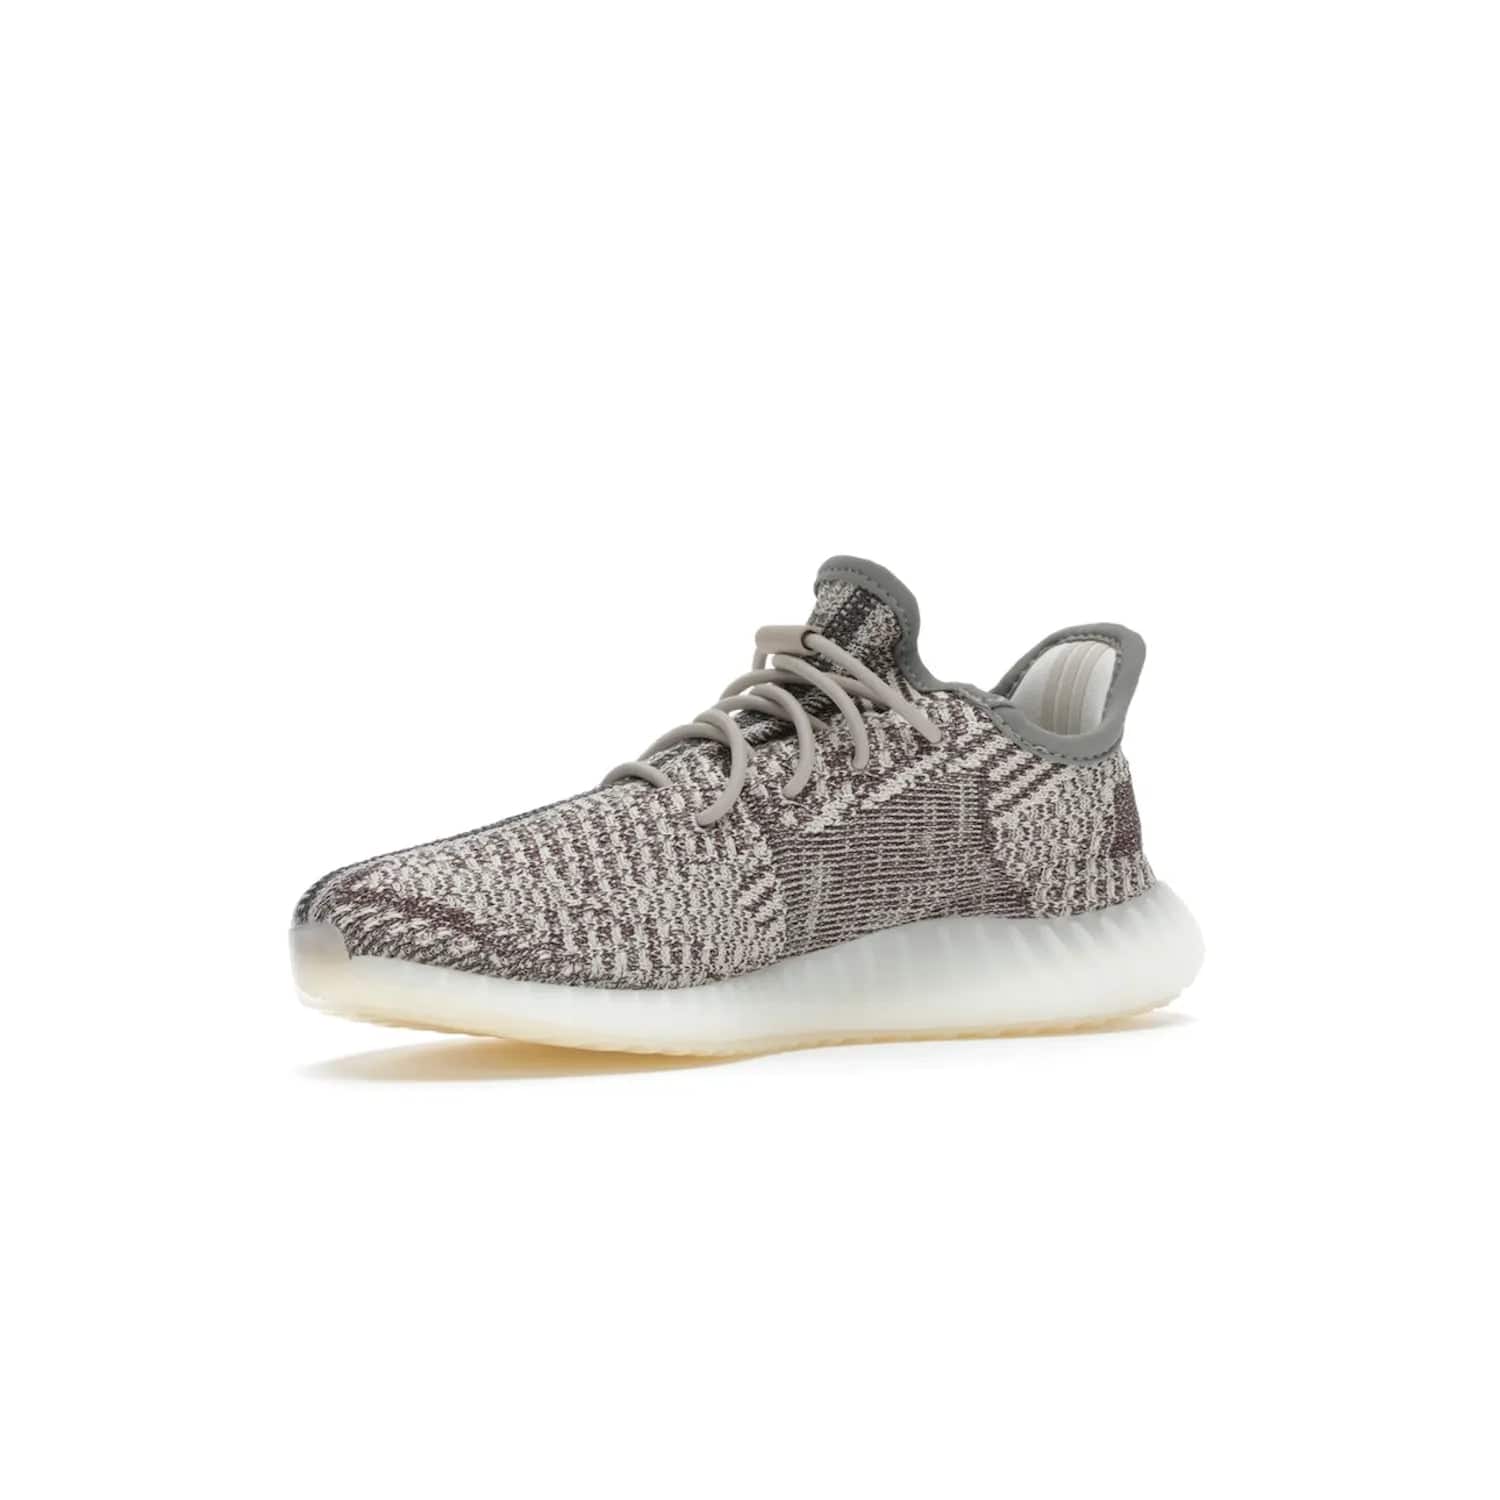 adidas Yeezy Boost 350 V2 Zyon (Kids) - Image 16 - Only at www.BallersClubKickz.com - The adidas Yeezy Boost 350 V2 Zyon (Kids) - perfect pick for fashion-savvy kids. Features soft Primeknit upper, lace closure & colorful patterning. Comfort & style for kids' summer outfits!